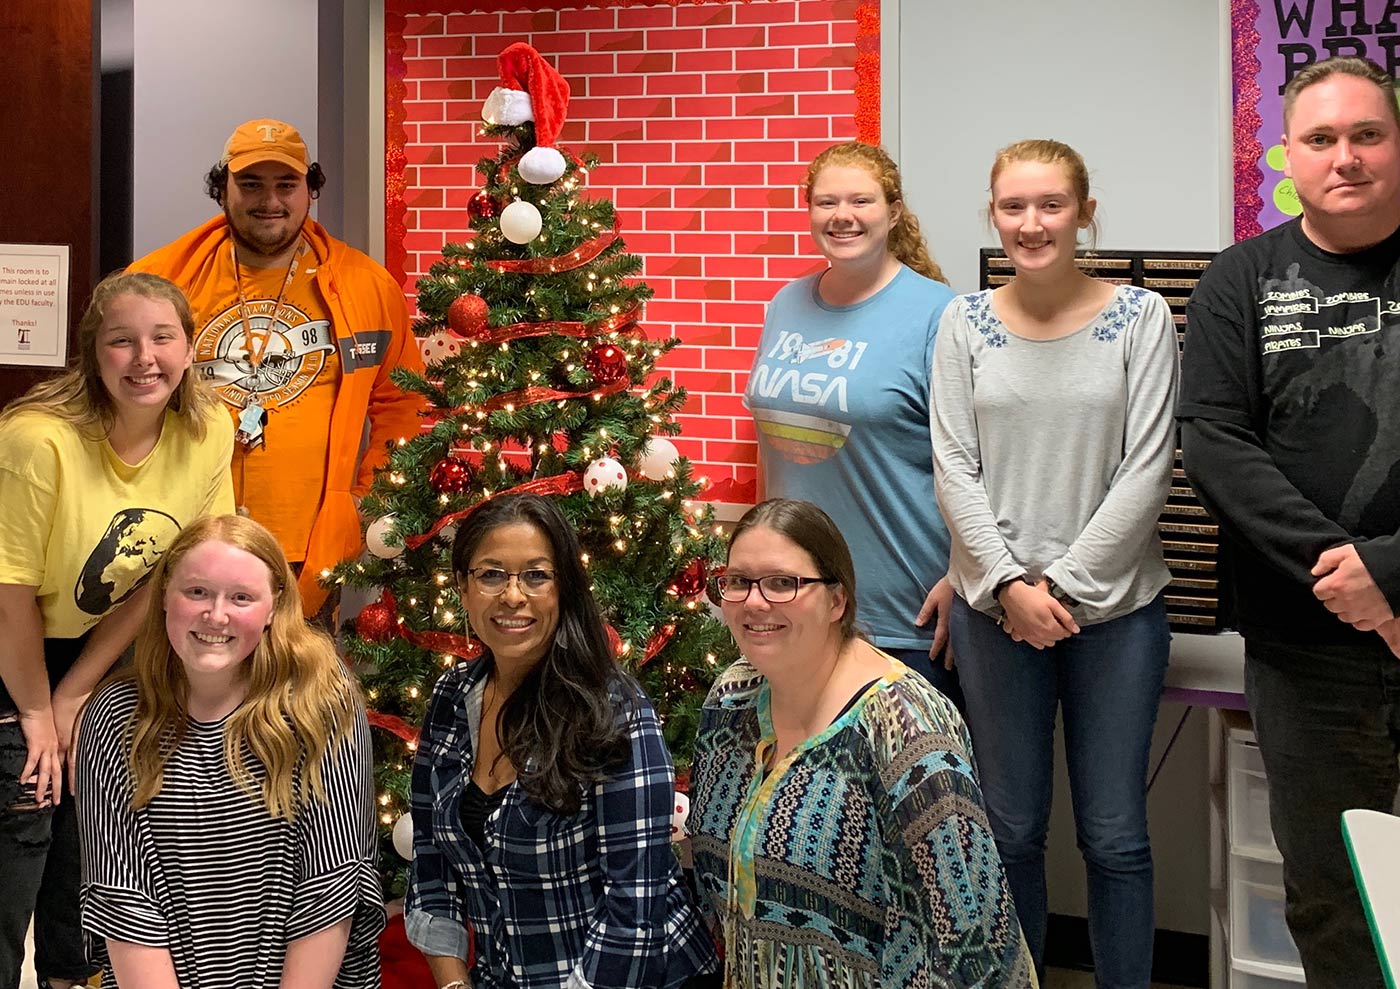 Members of Roane State’s Student Tennessee Education Association chapter are shown with their Angel Tree project. From left: Kayla Dishman, Matthew Sims, Jill Kesterson, Sedona Harrell and Earl Davis. Front row, from left: Gabby McCarty, Gioconda Duran and Adreinne Hannah.